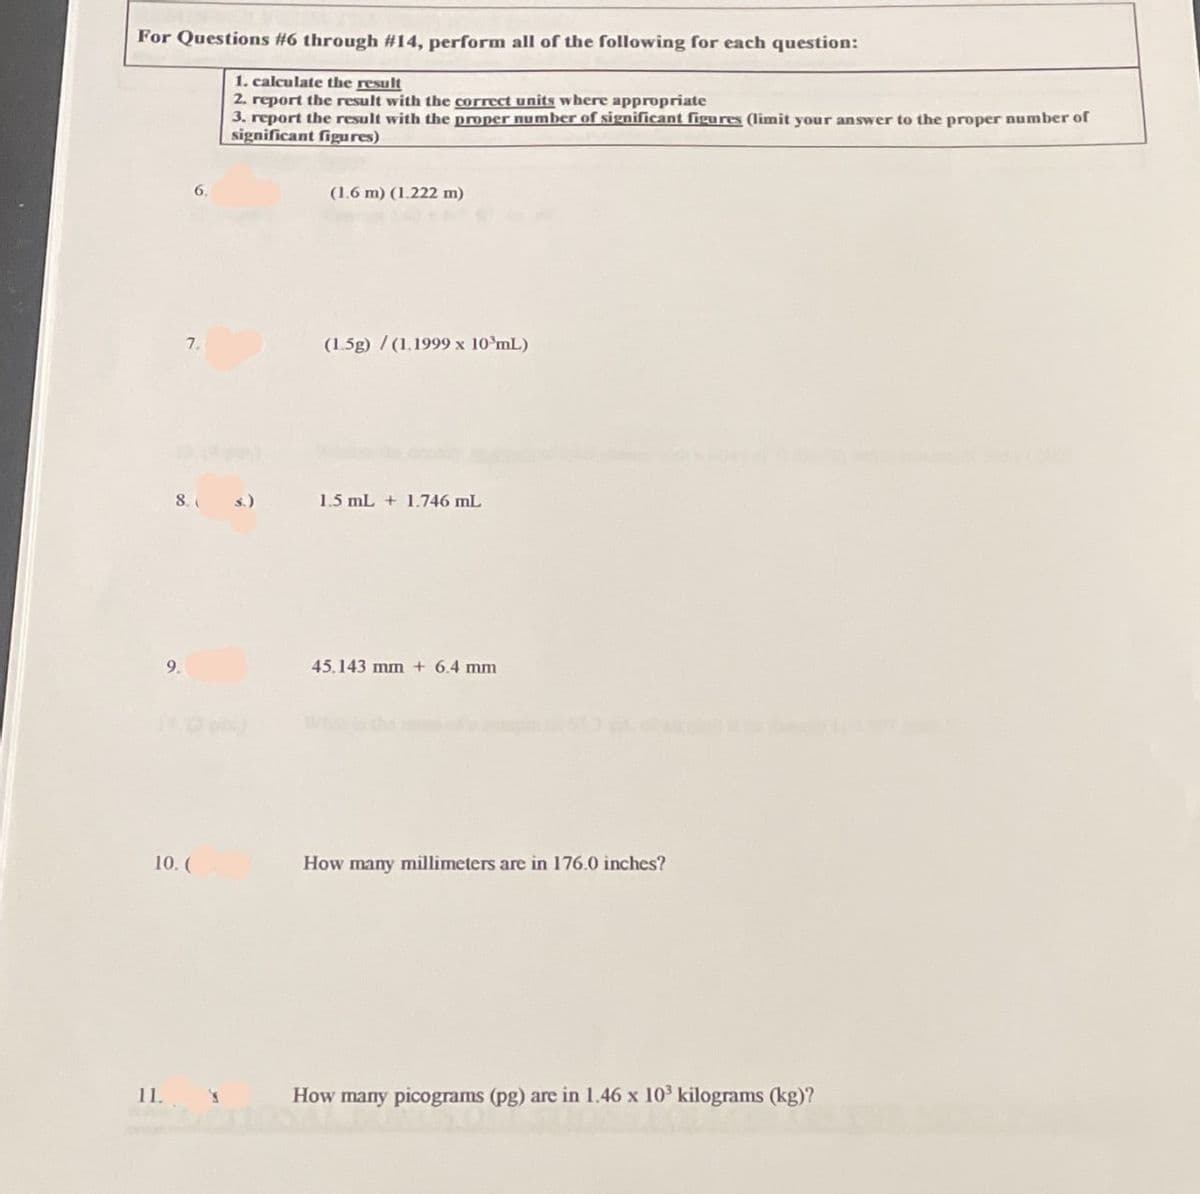 For Questions #6 through #14, perform all of the following for each question:
1. calculate the result
2. report the result with the correct units where appropriate
3. report the result with the proper number of significant figures (limit your answer to the proper number of
significant figures)
6.
(1.6 m) (1.222 m)
7.
(1.5g)/(1.1999 x 10 mL)
8. s.)
1.5 mL + 1.746 mL
45.143 mm + 6.4 mm
How many millimeters are in 176.0 inches?
How many picograms (pg) are in 1.46 x 10³ kilograms (kg)?
9.
10. (
11.